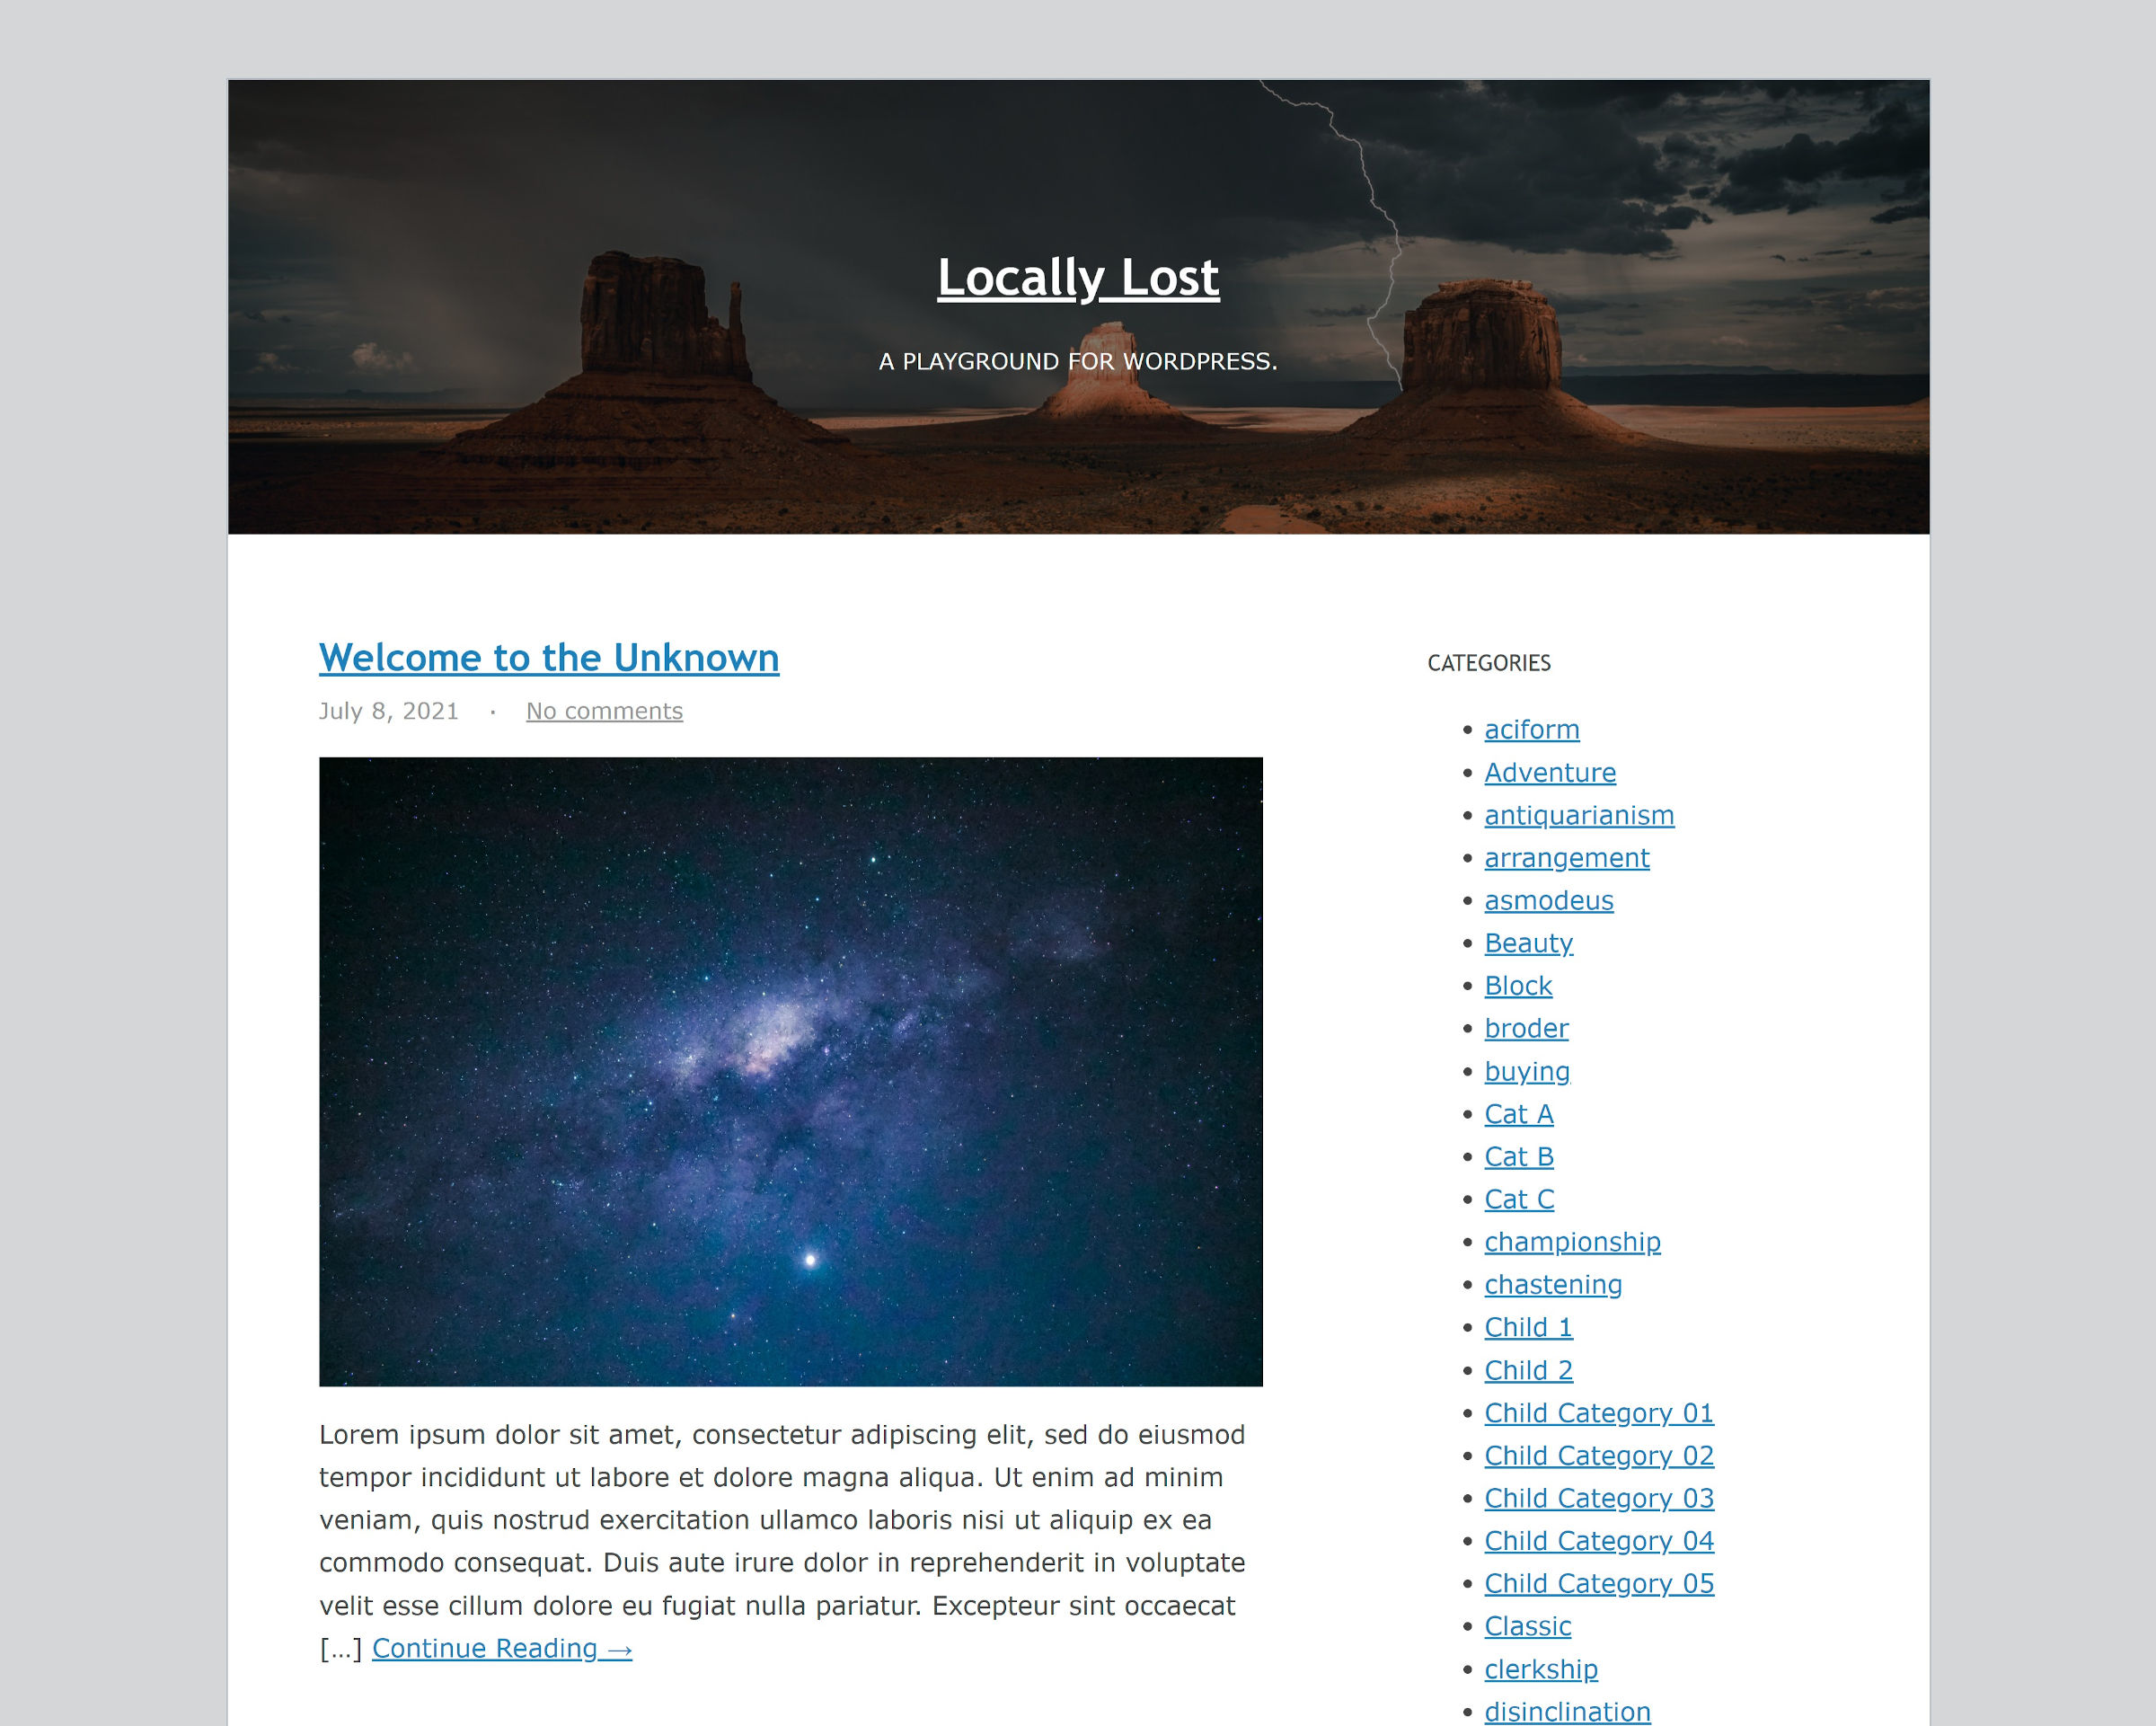 Blog theme with a large image header, followed by a two column design with content on the left and widgets on the right.